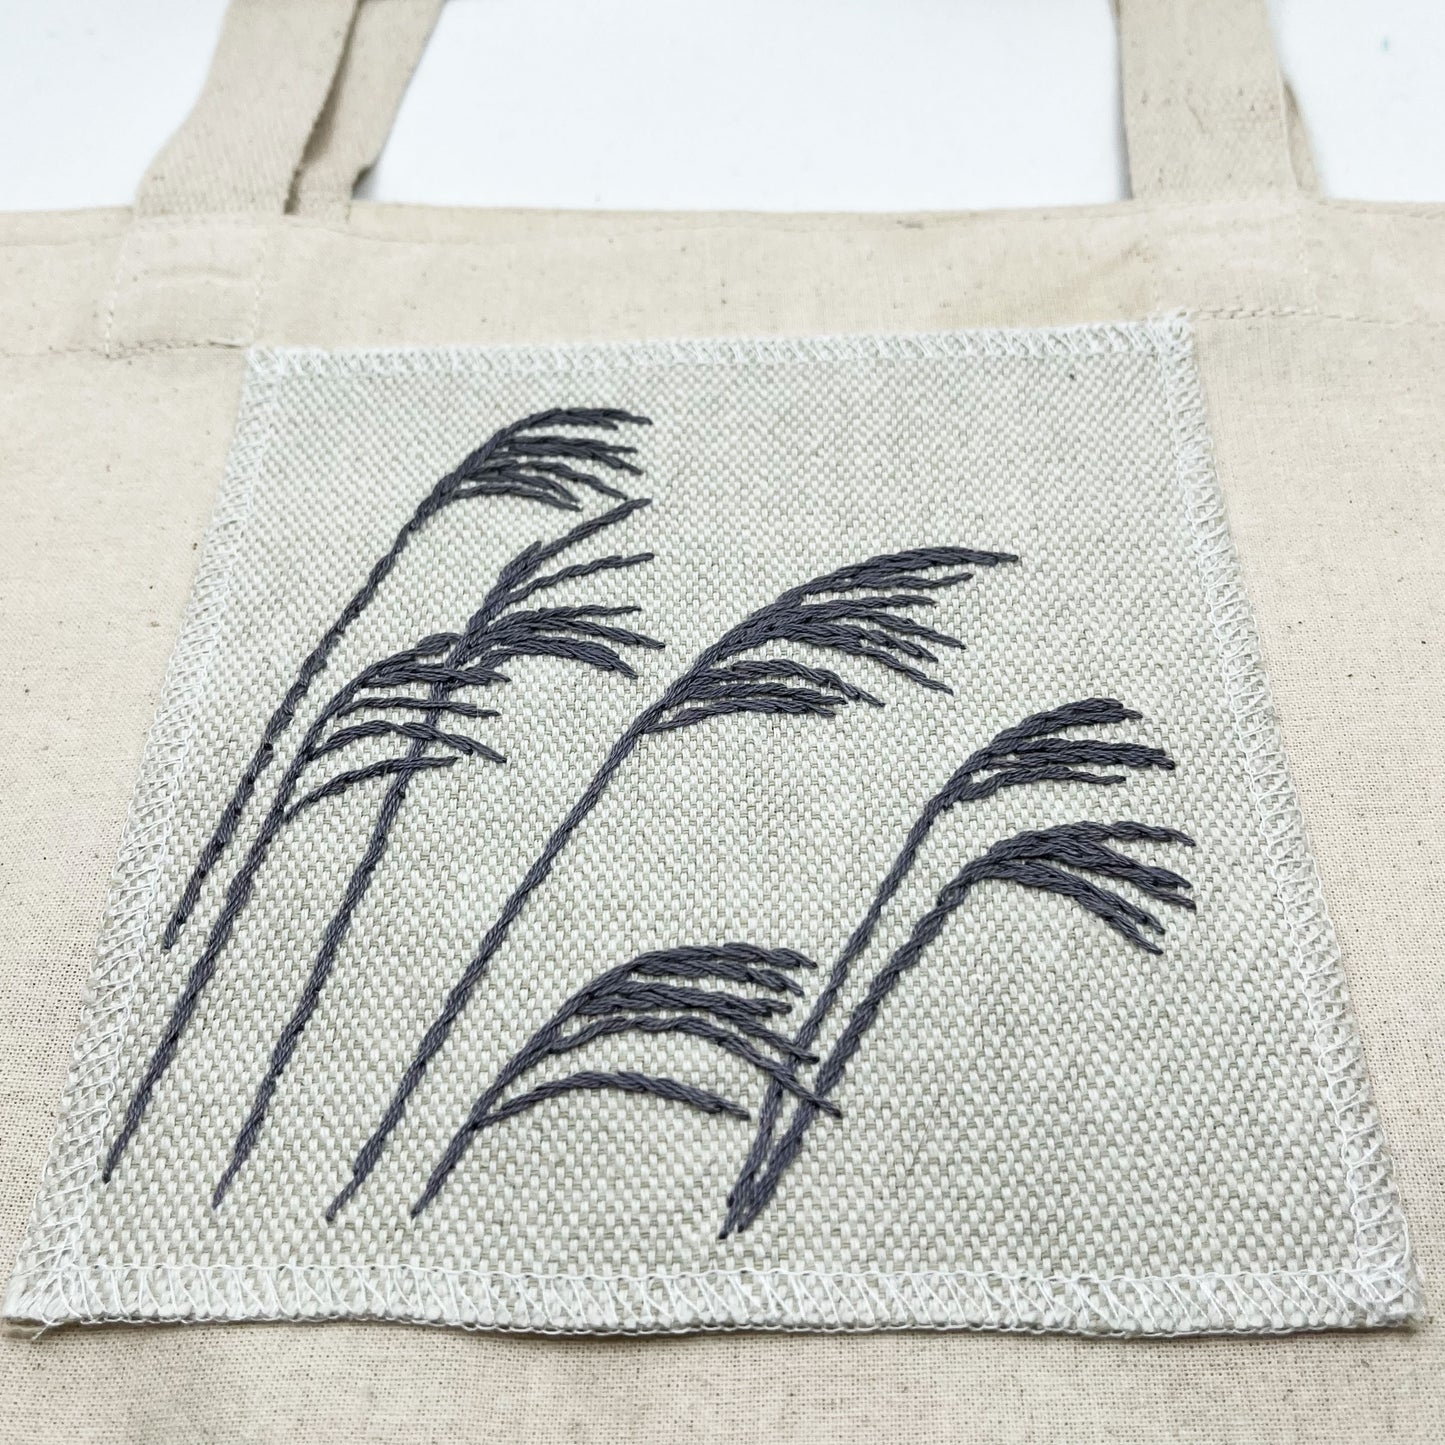 Cream colored square patch with stalks of wild grass stitched in grey thread with a stem stitch, on cream colored tote bag on a white background